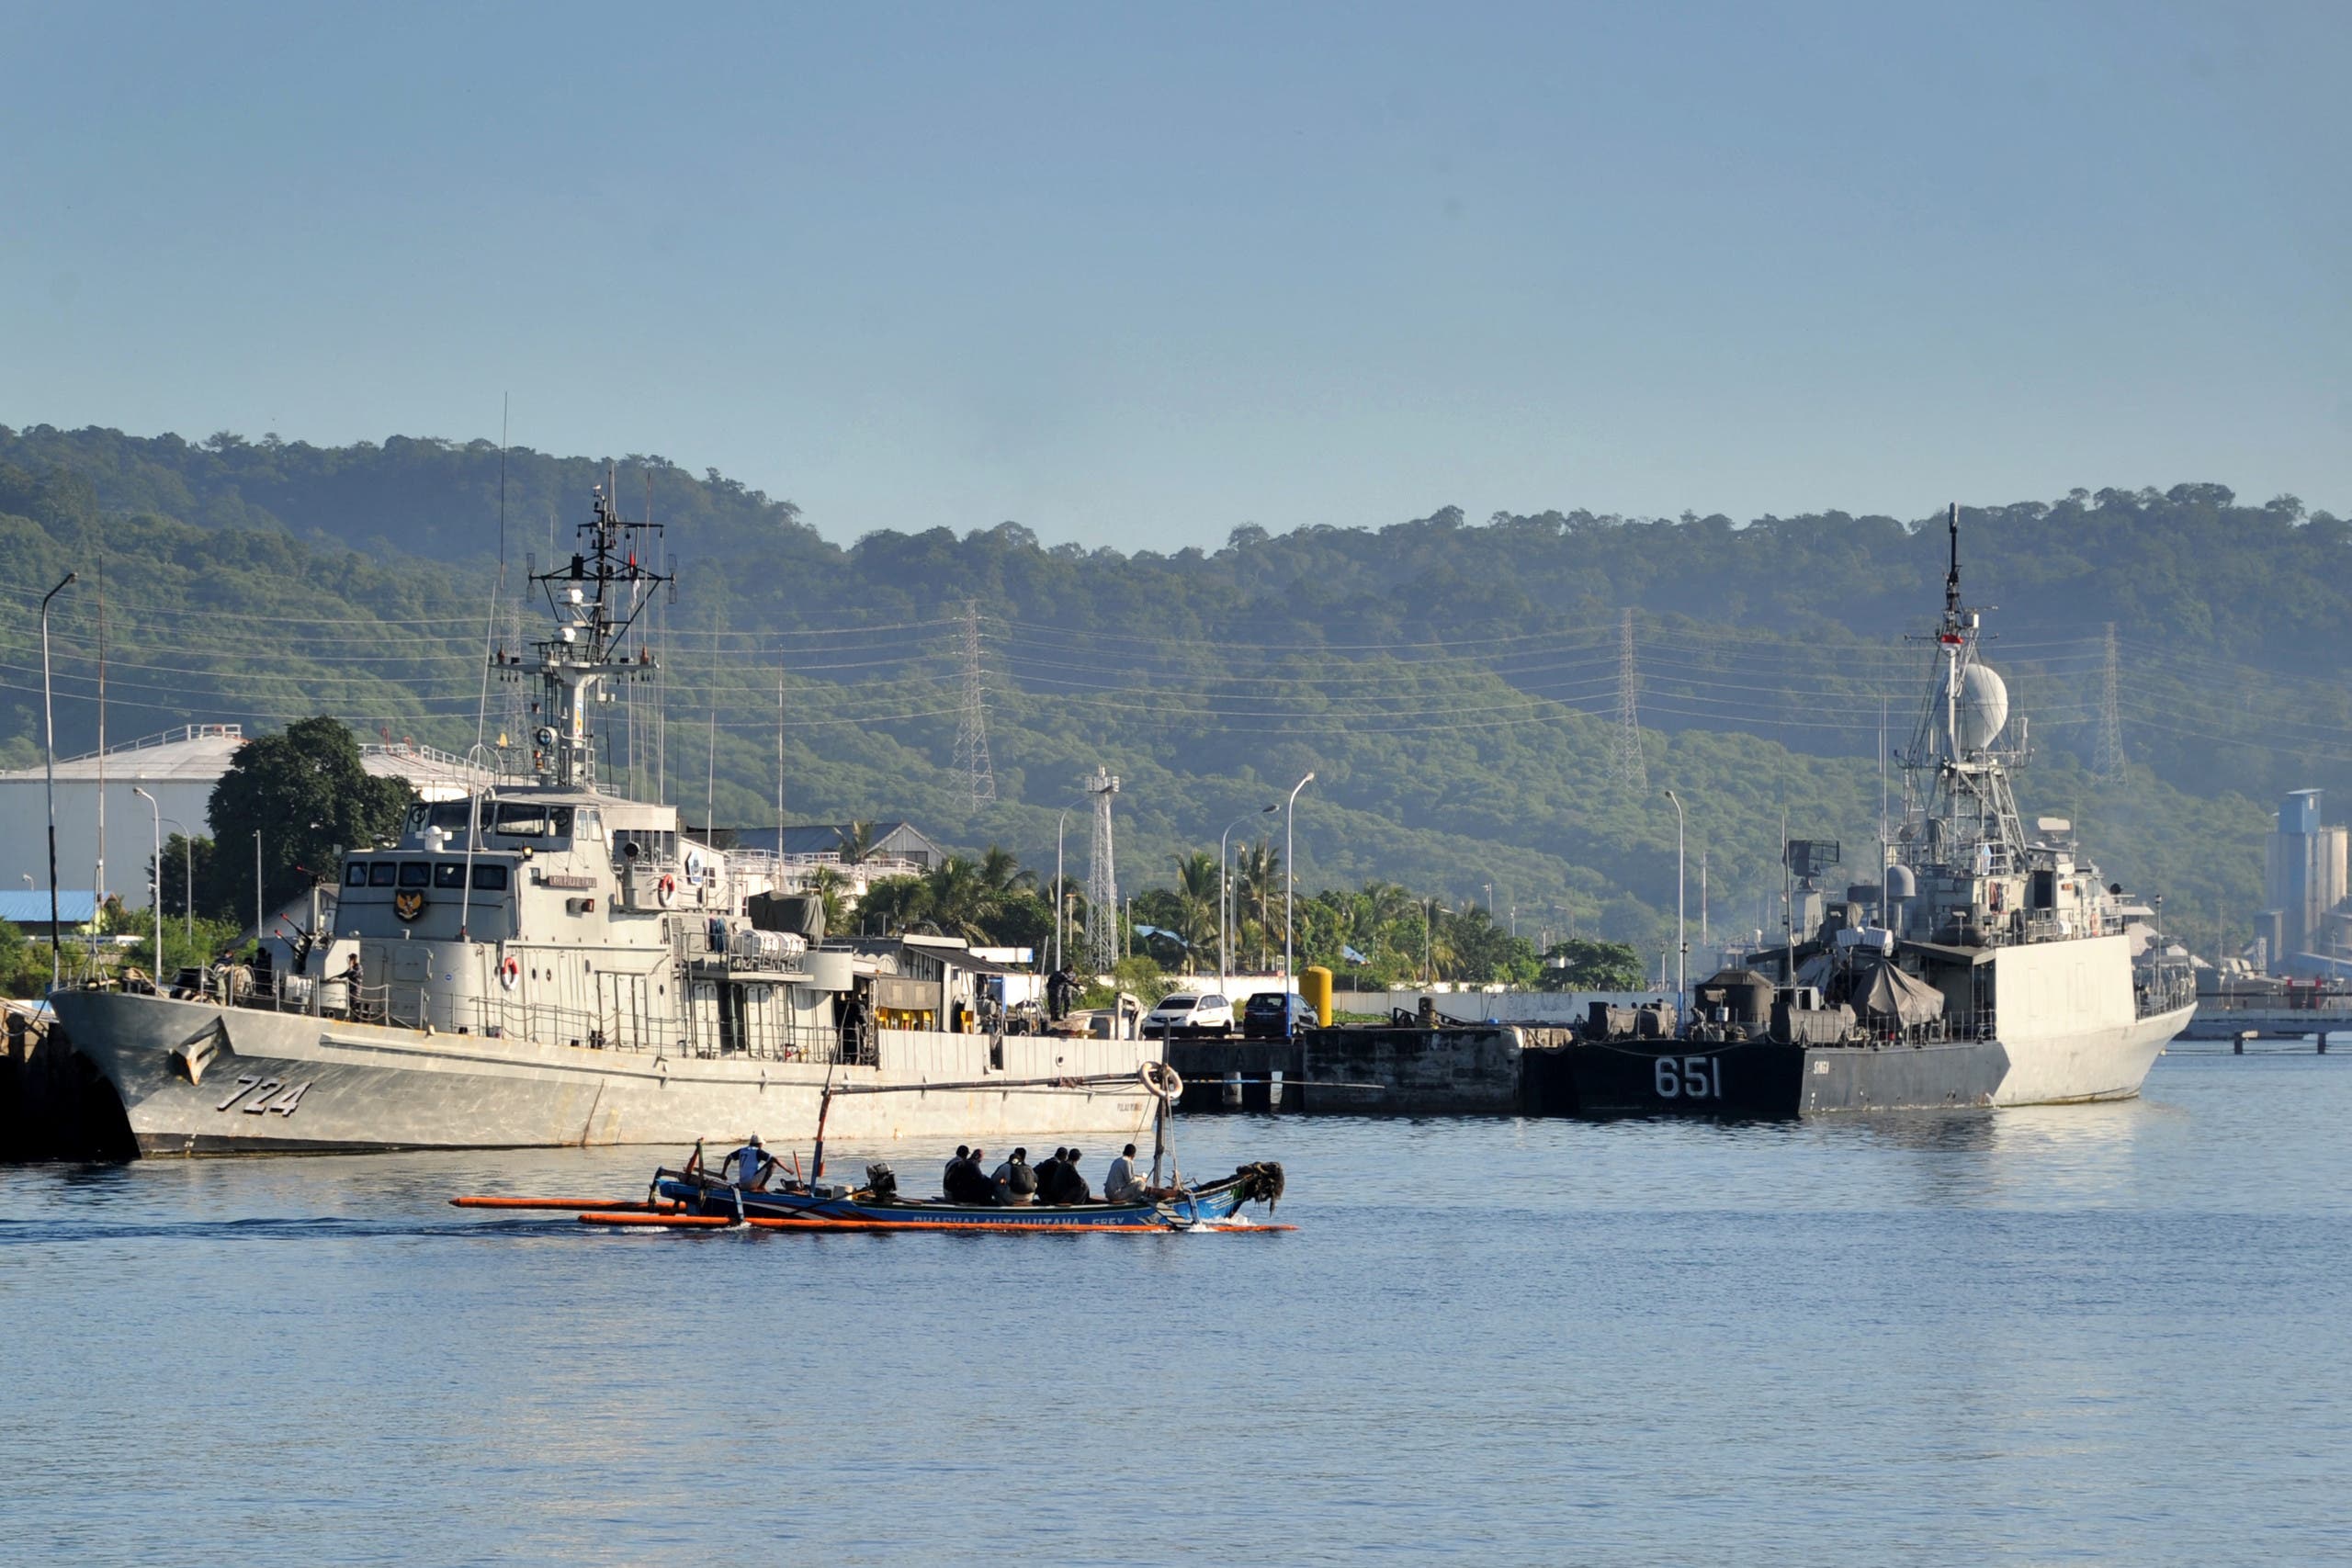 An outrigger canoe sails past Indonesian Navy ships at the naval base in Banyuwangi, East Java province, on April 24, 2021, as the military continues search operations off the coast of Bali for the Navy's KRI Nanggala submarine that went missing April 21 during a training exercise. (AFP)